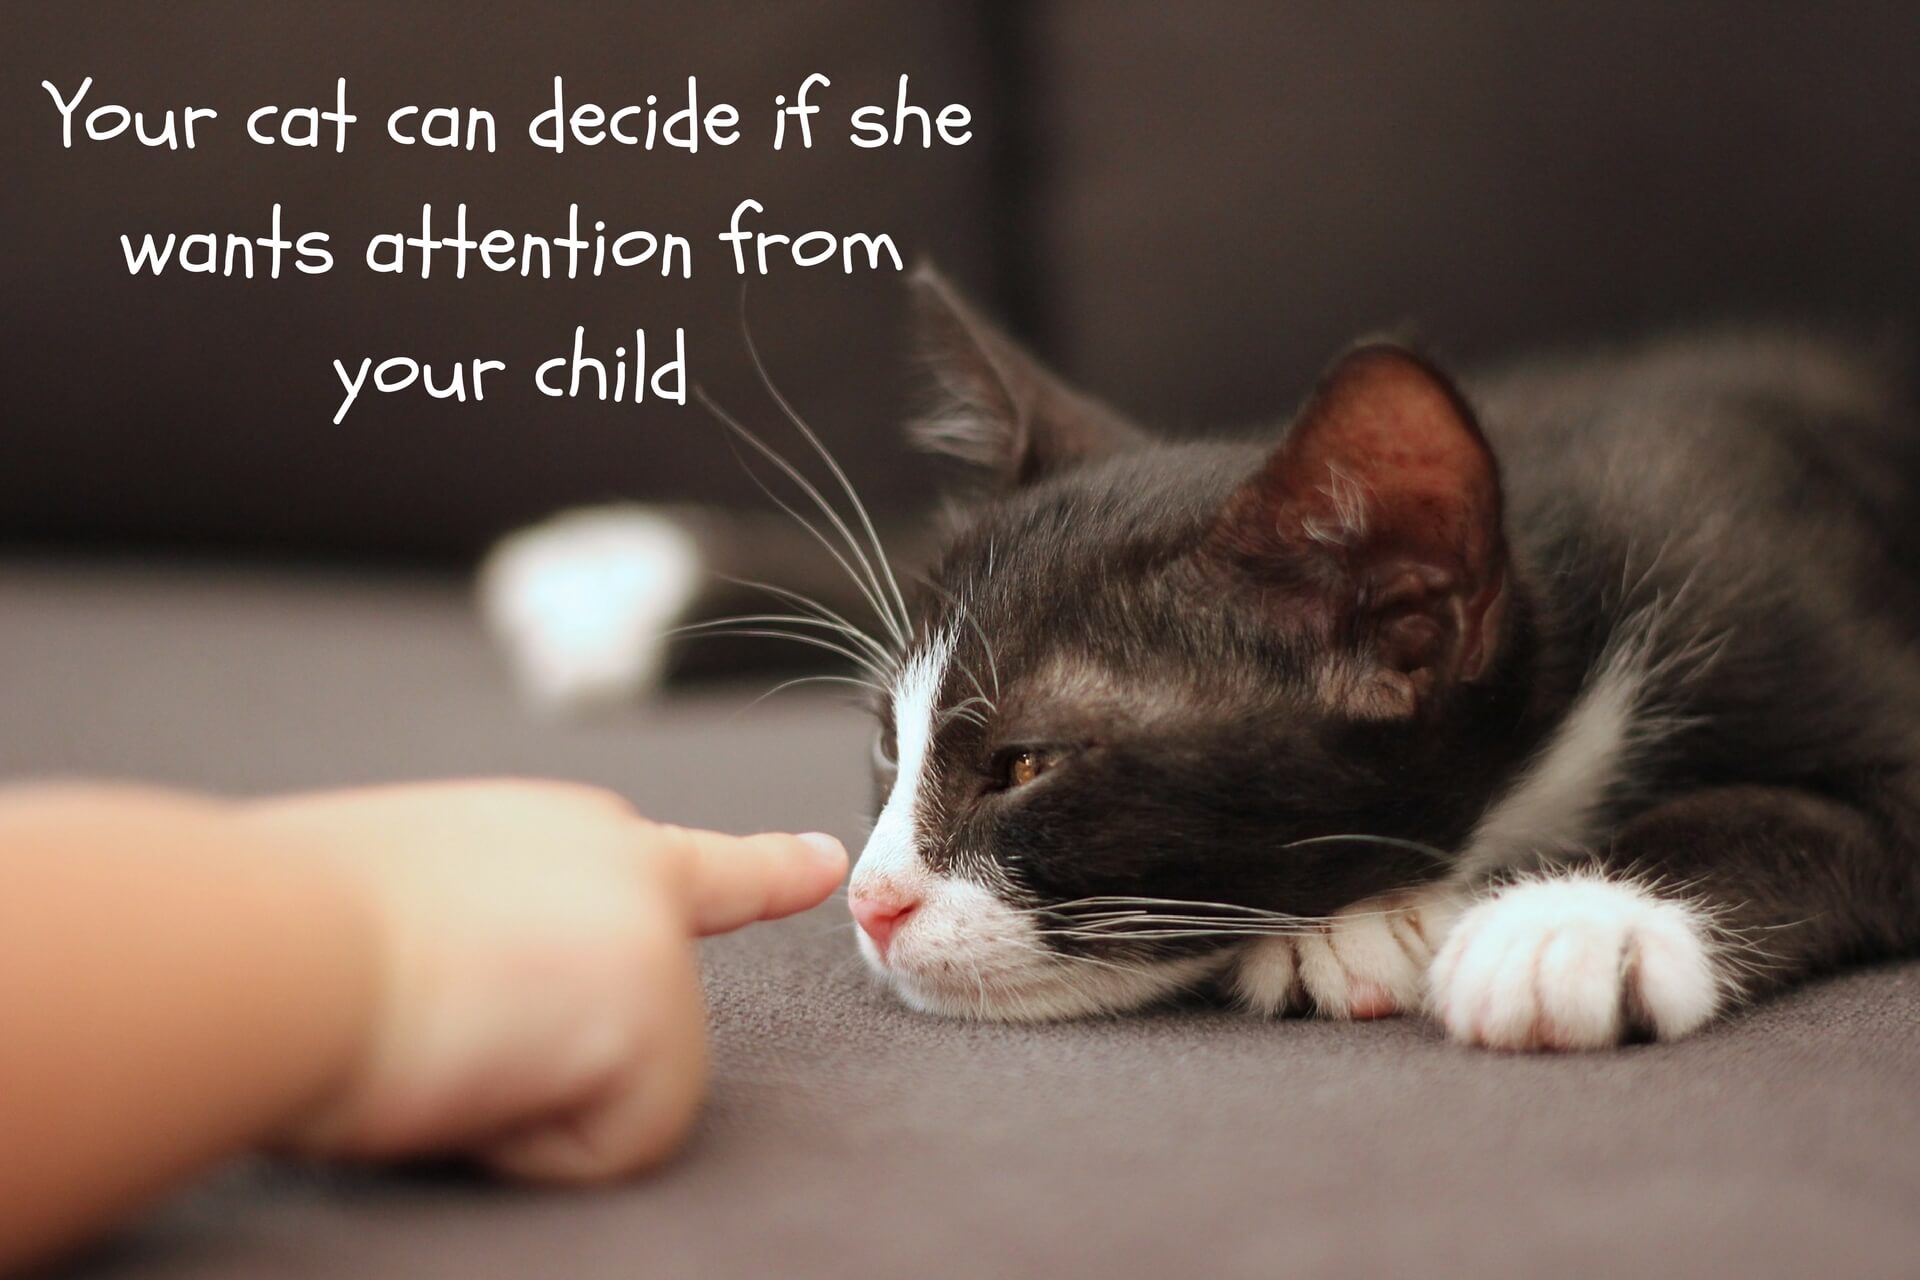 Let the cat decide if attention is OK